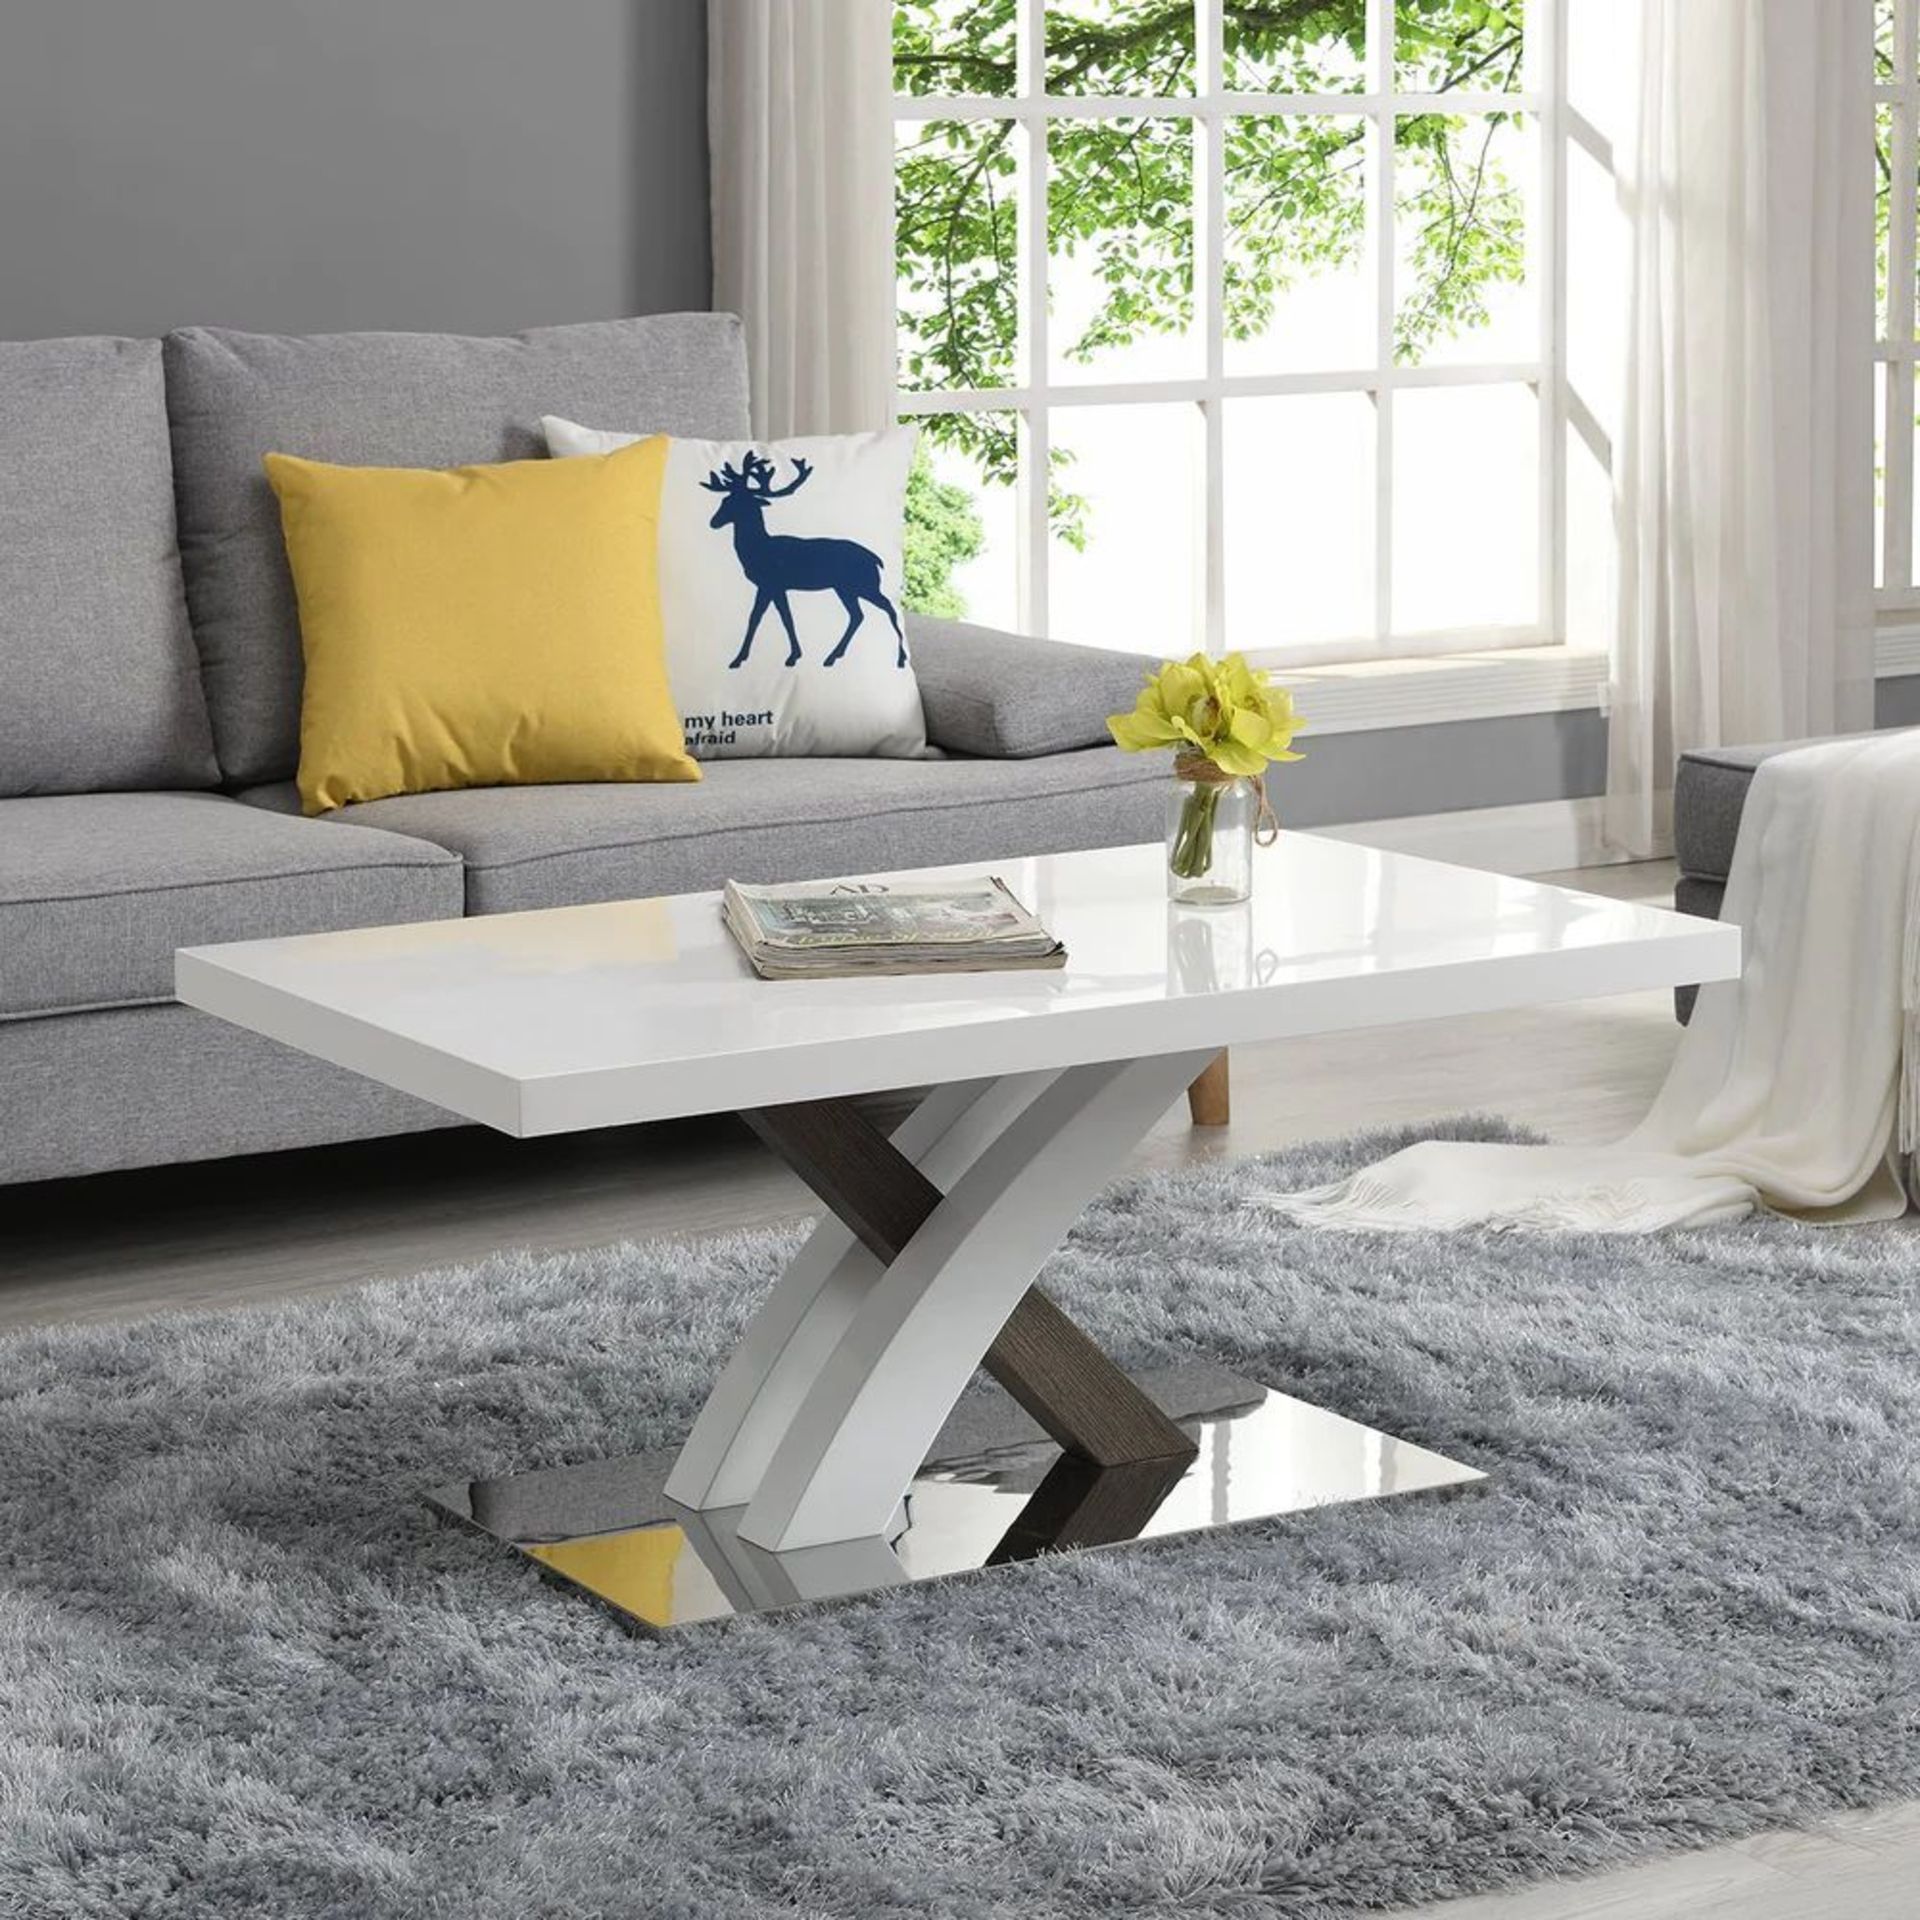 Basel High Gloss White Coffee Table with Stainless Steel Base. - ER23. RRP £199.99. The white glossy - Image 3 of 4